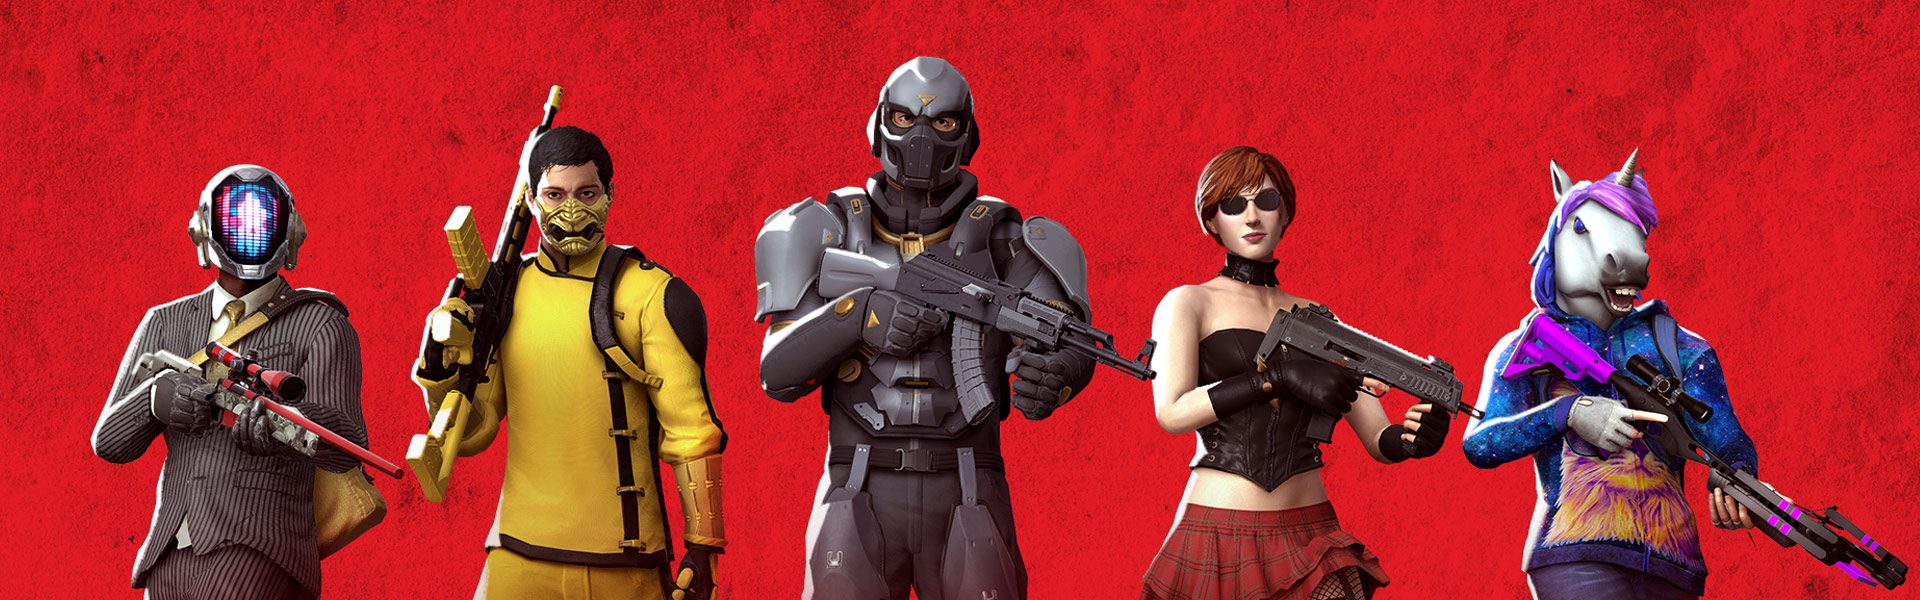 download h1z1 battle royale ps4 for free